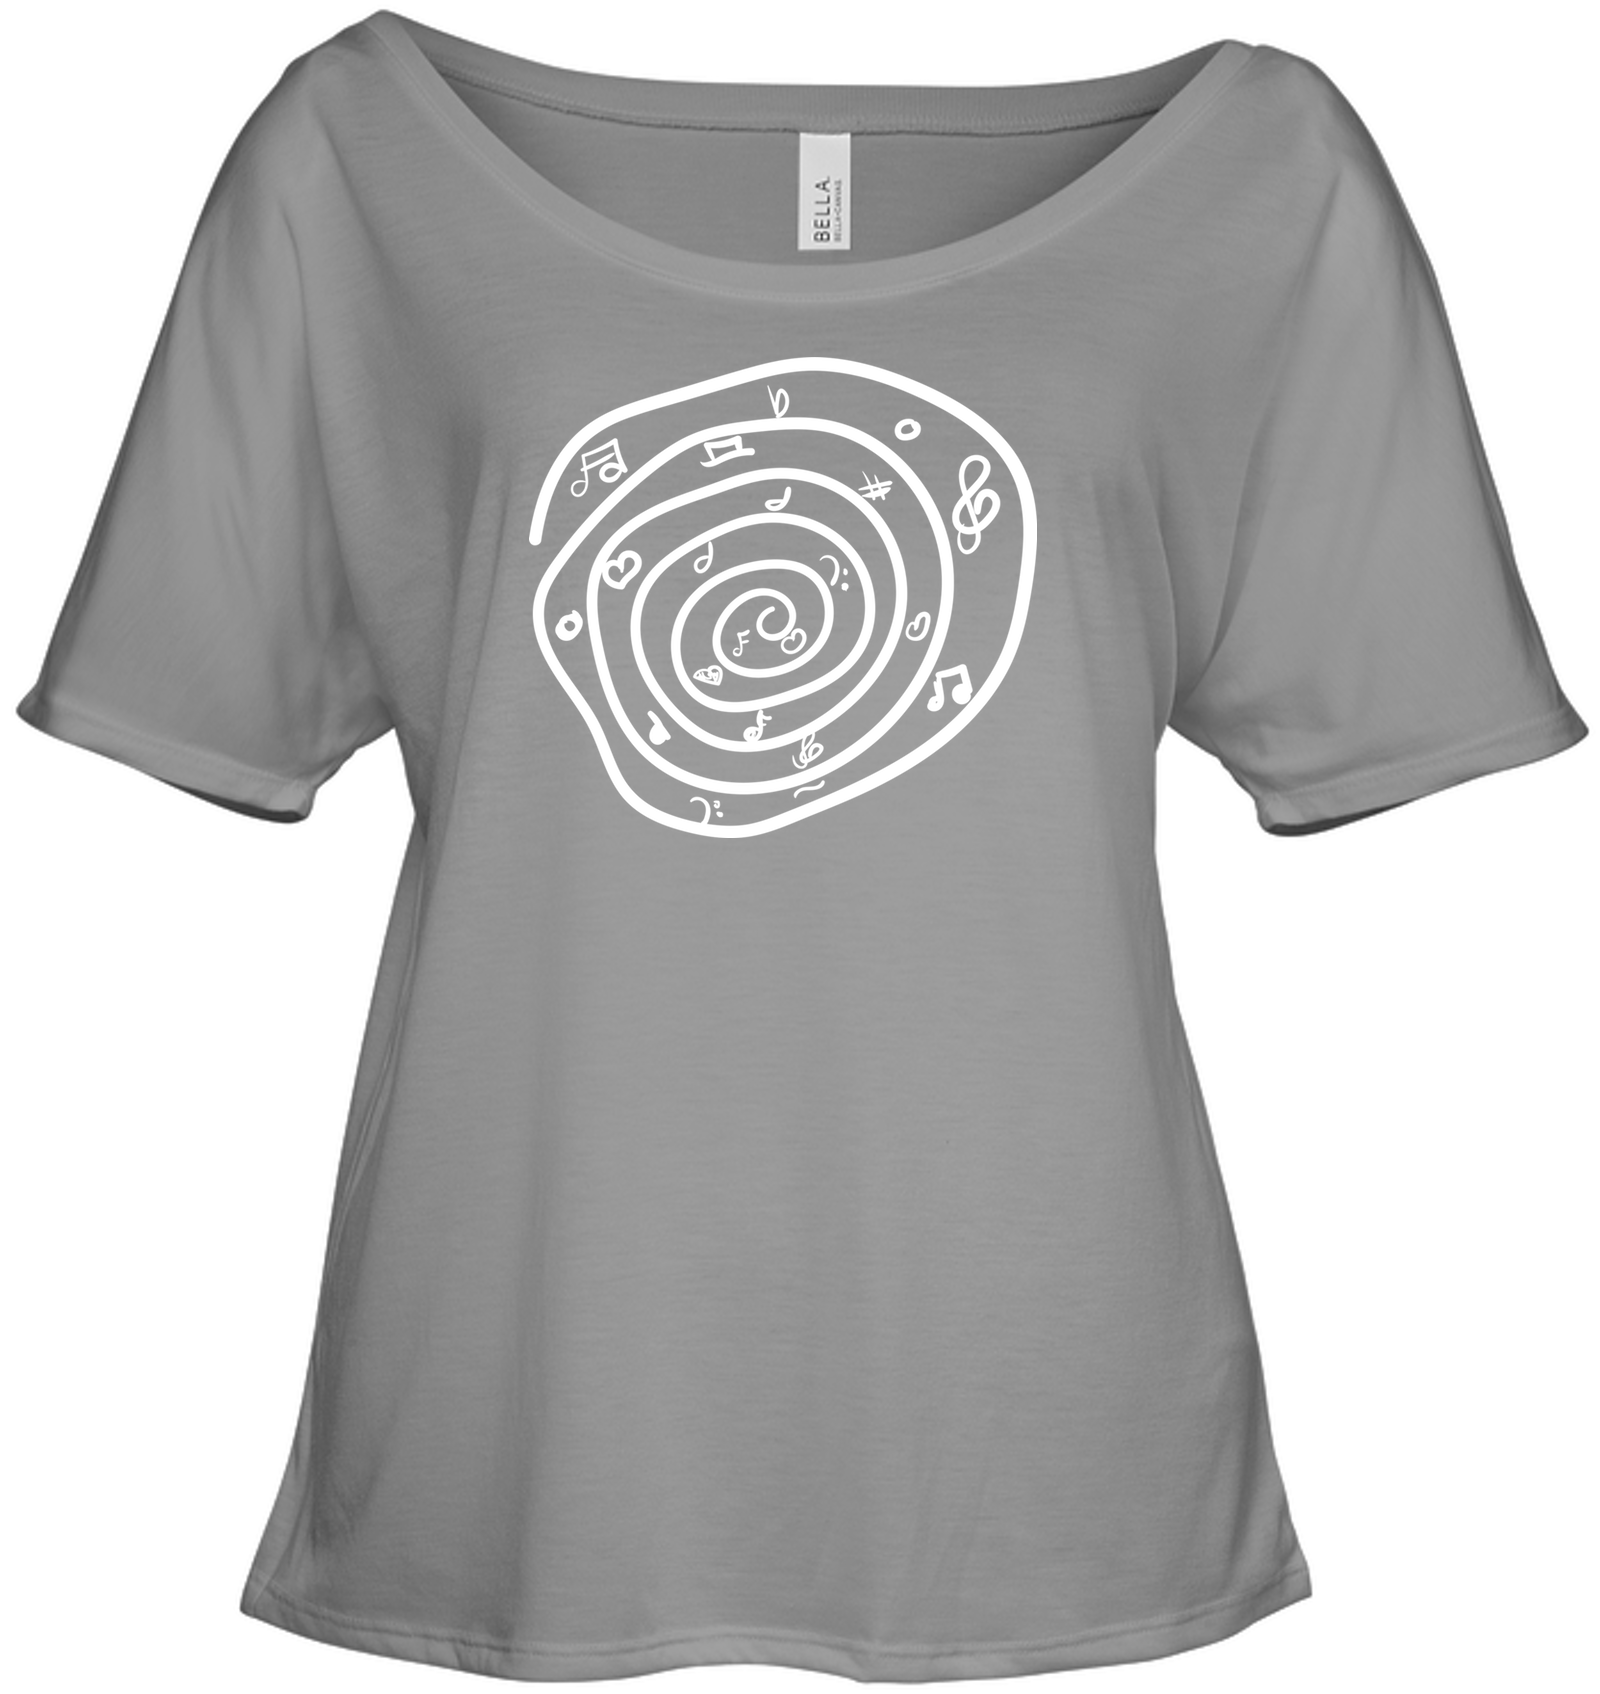 Notes in a Swirl - Bella + Canvas Women's Slouchy Tee